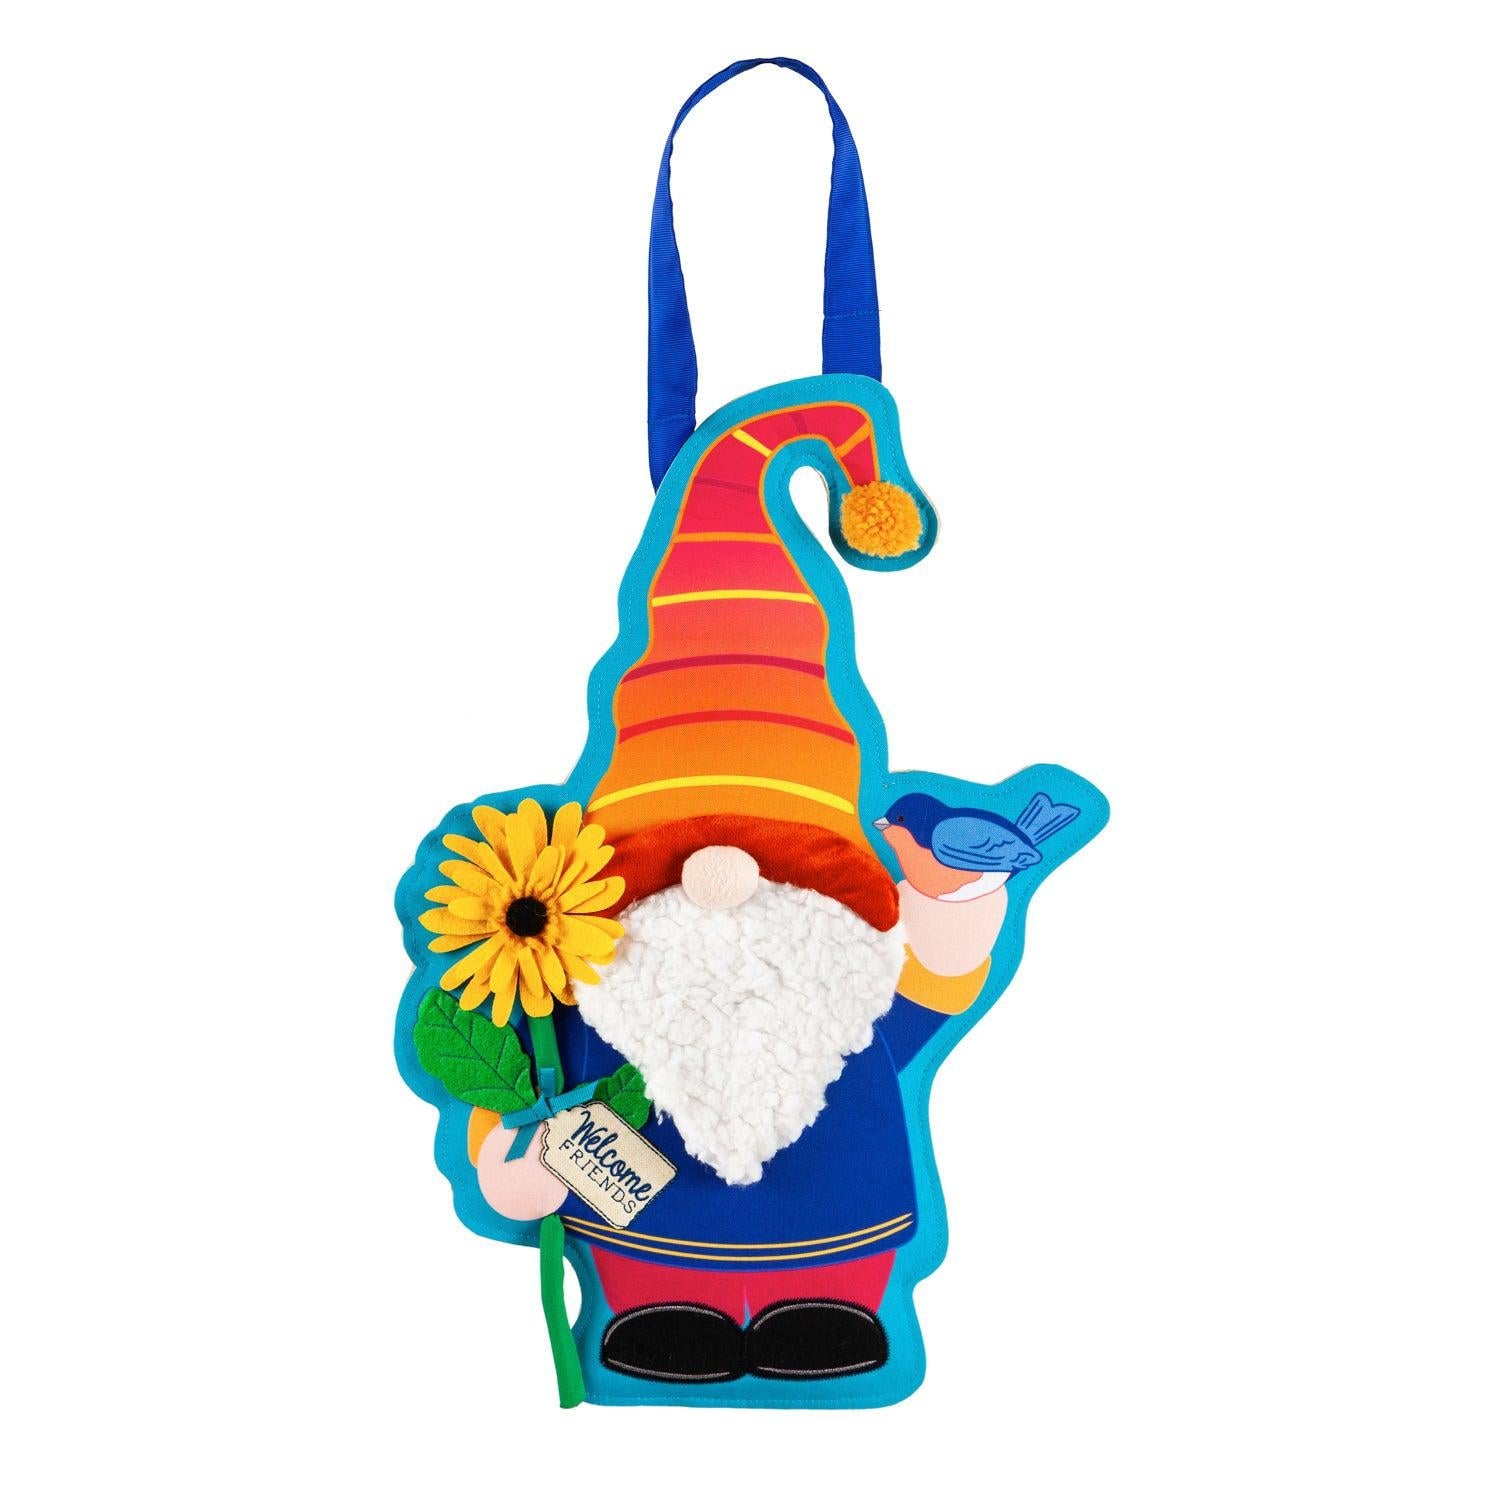 The brightly colored Garden Gnome door décor features a charming gnome standing among flowers while holding a flower and a bluebird. 